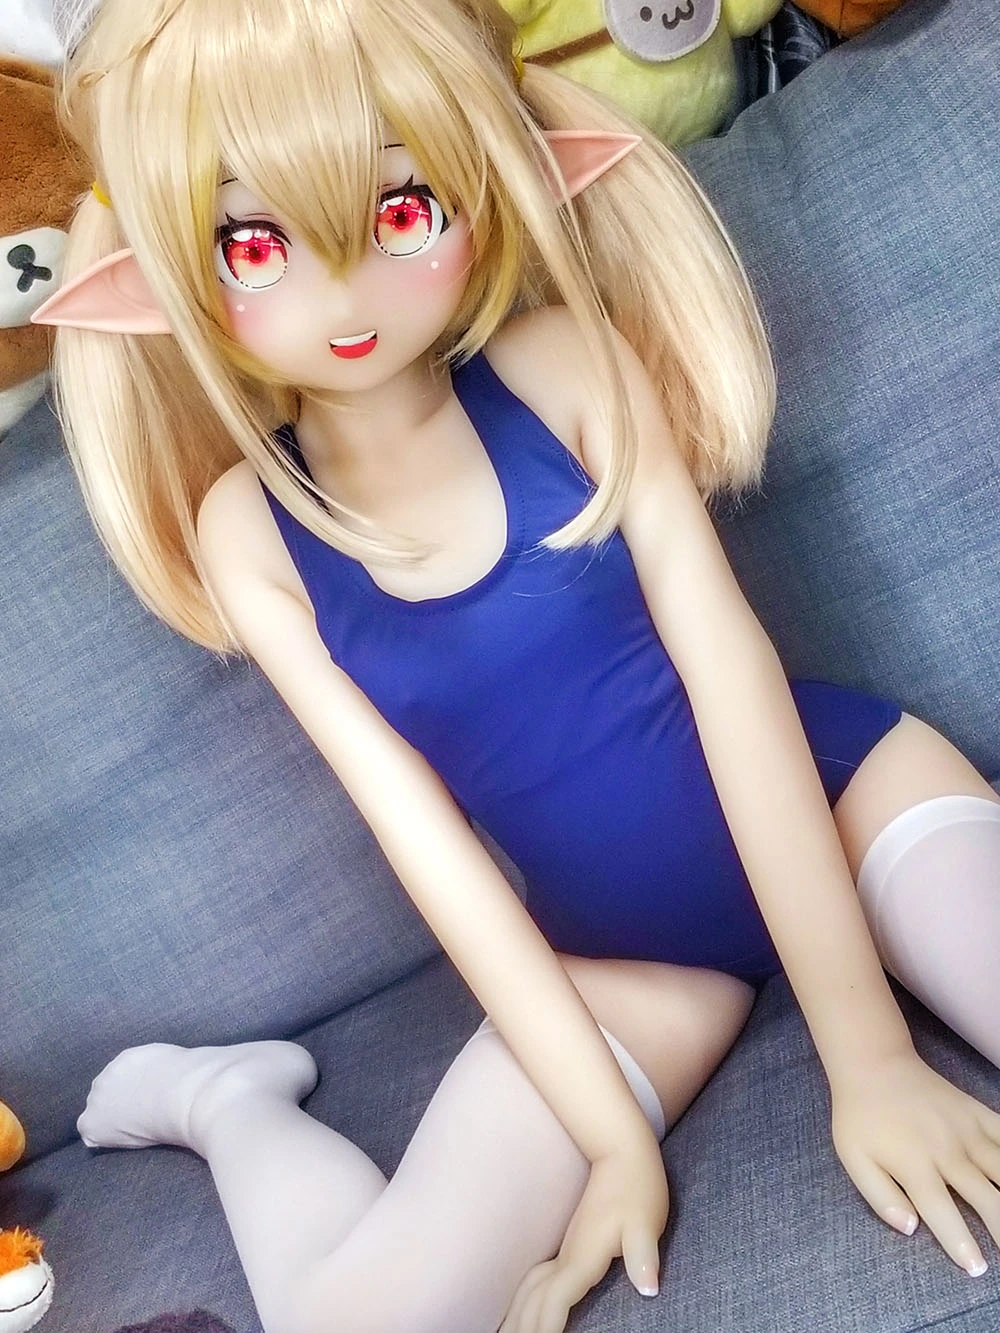 Small anime tits sexdoll Clay